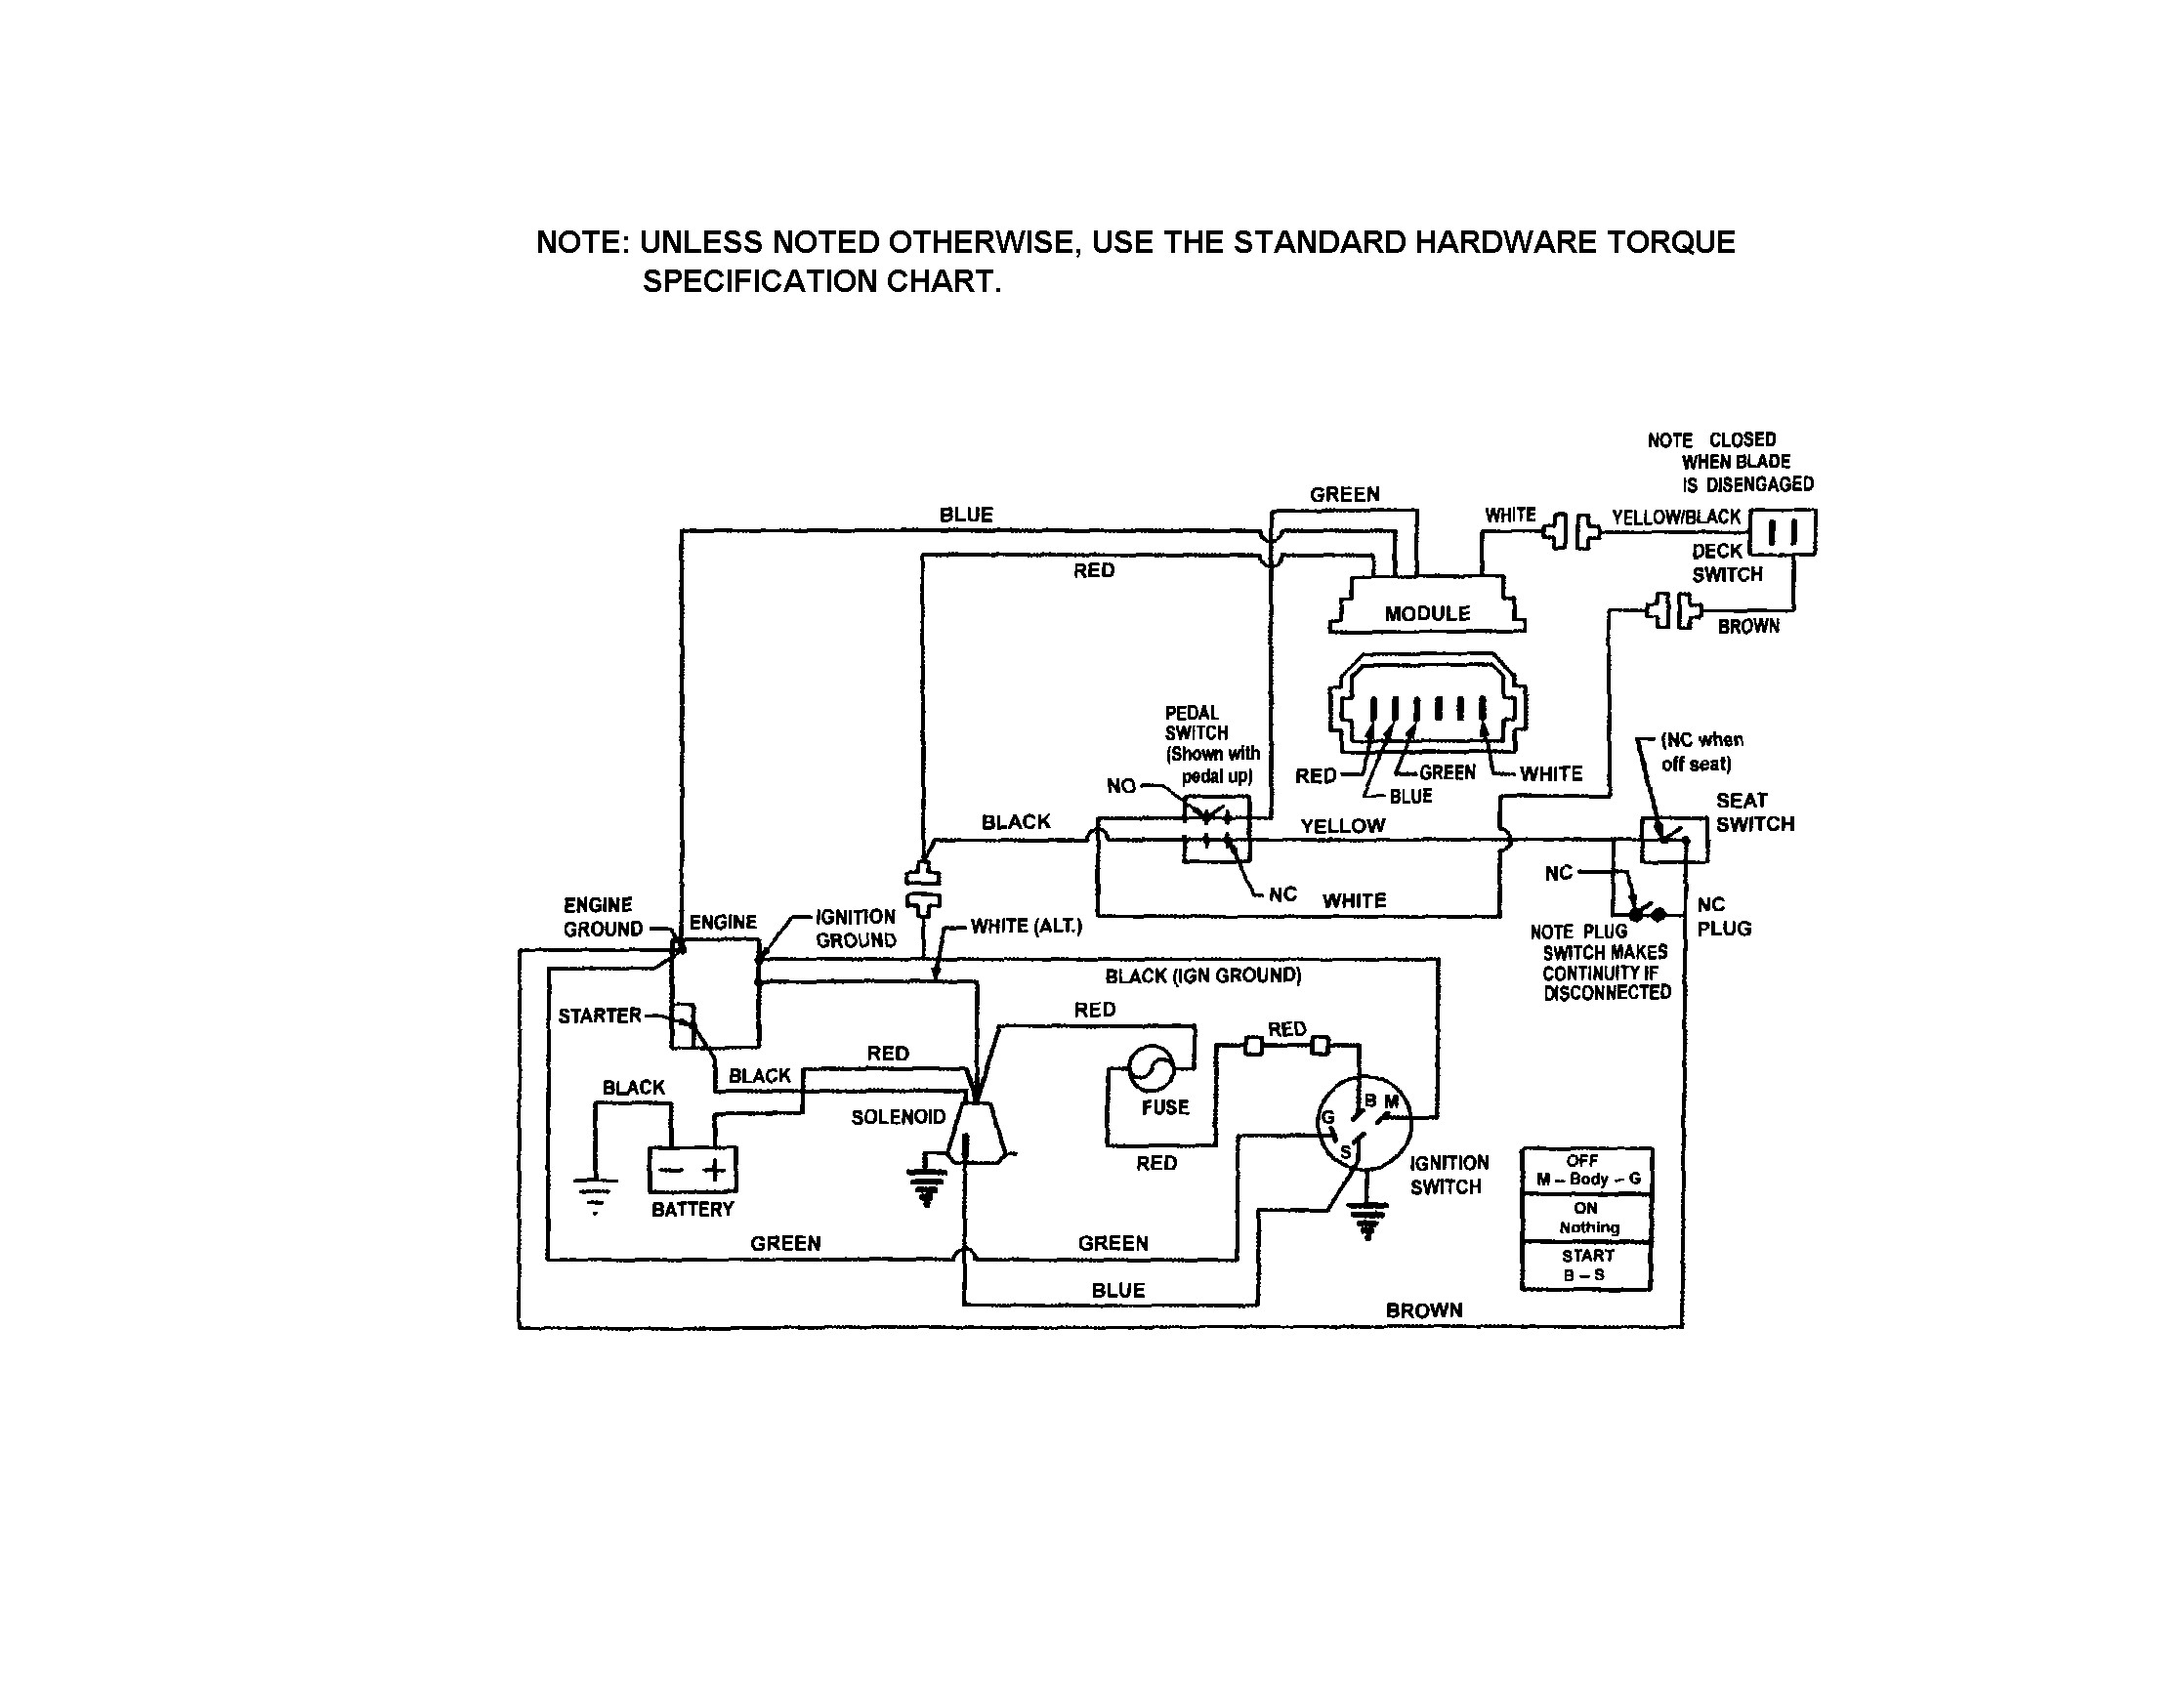 8 Hp Briggs Coil Wiring Diagram Free Picture | Wiring Diagram - Briggs And Stratton Magneto Wiring Diagram